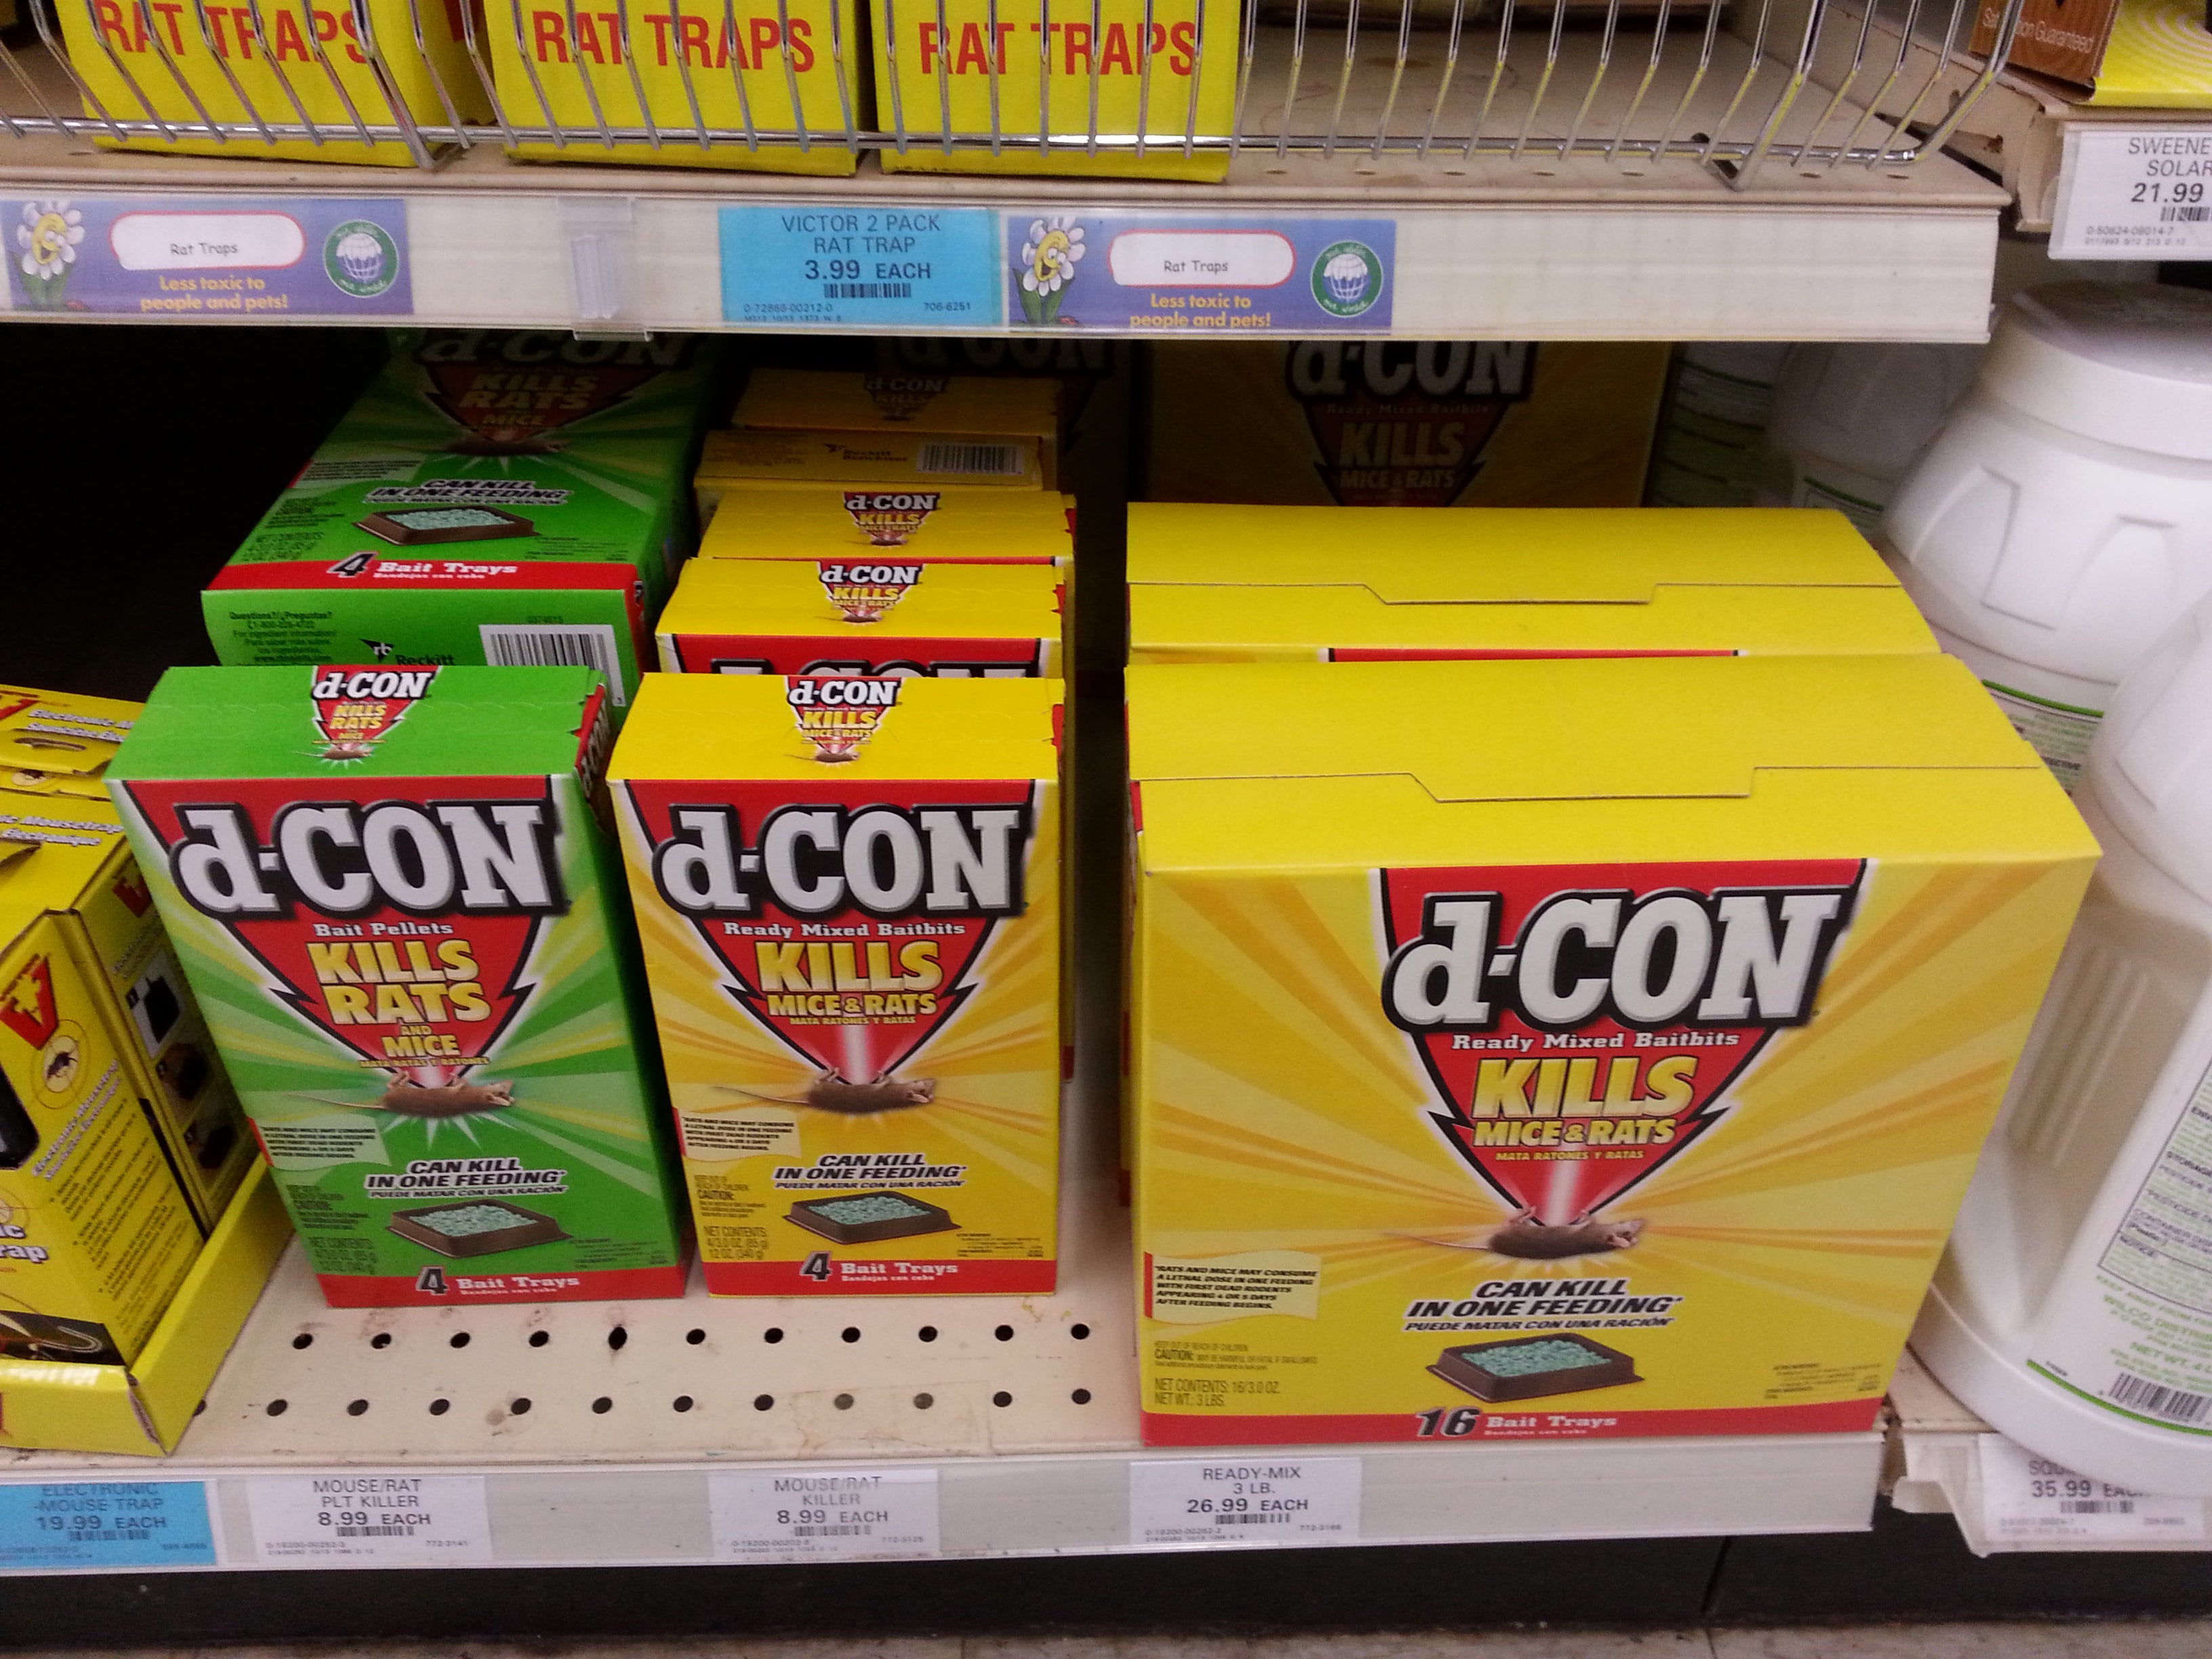 d-CON products.